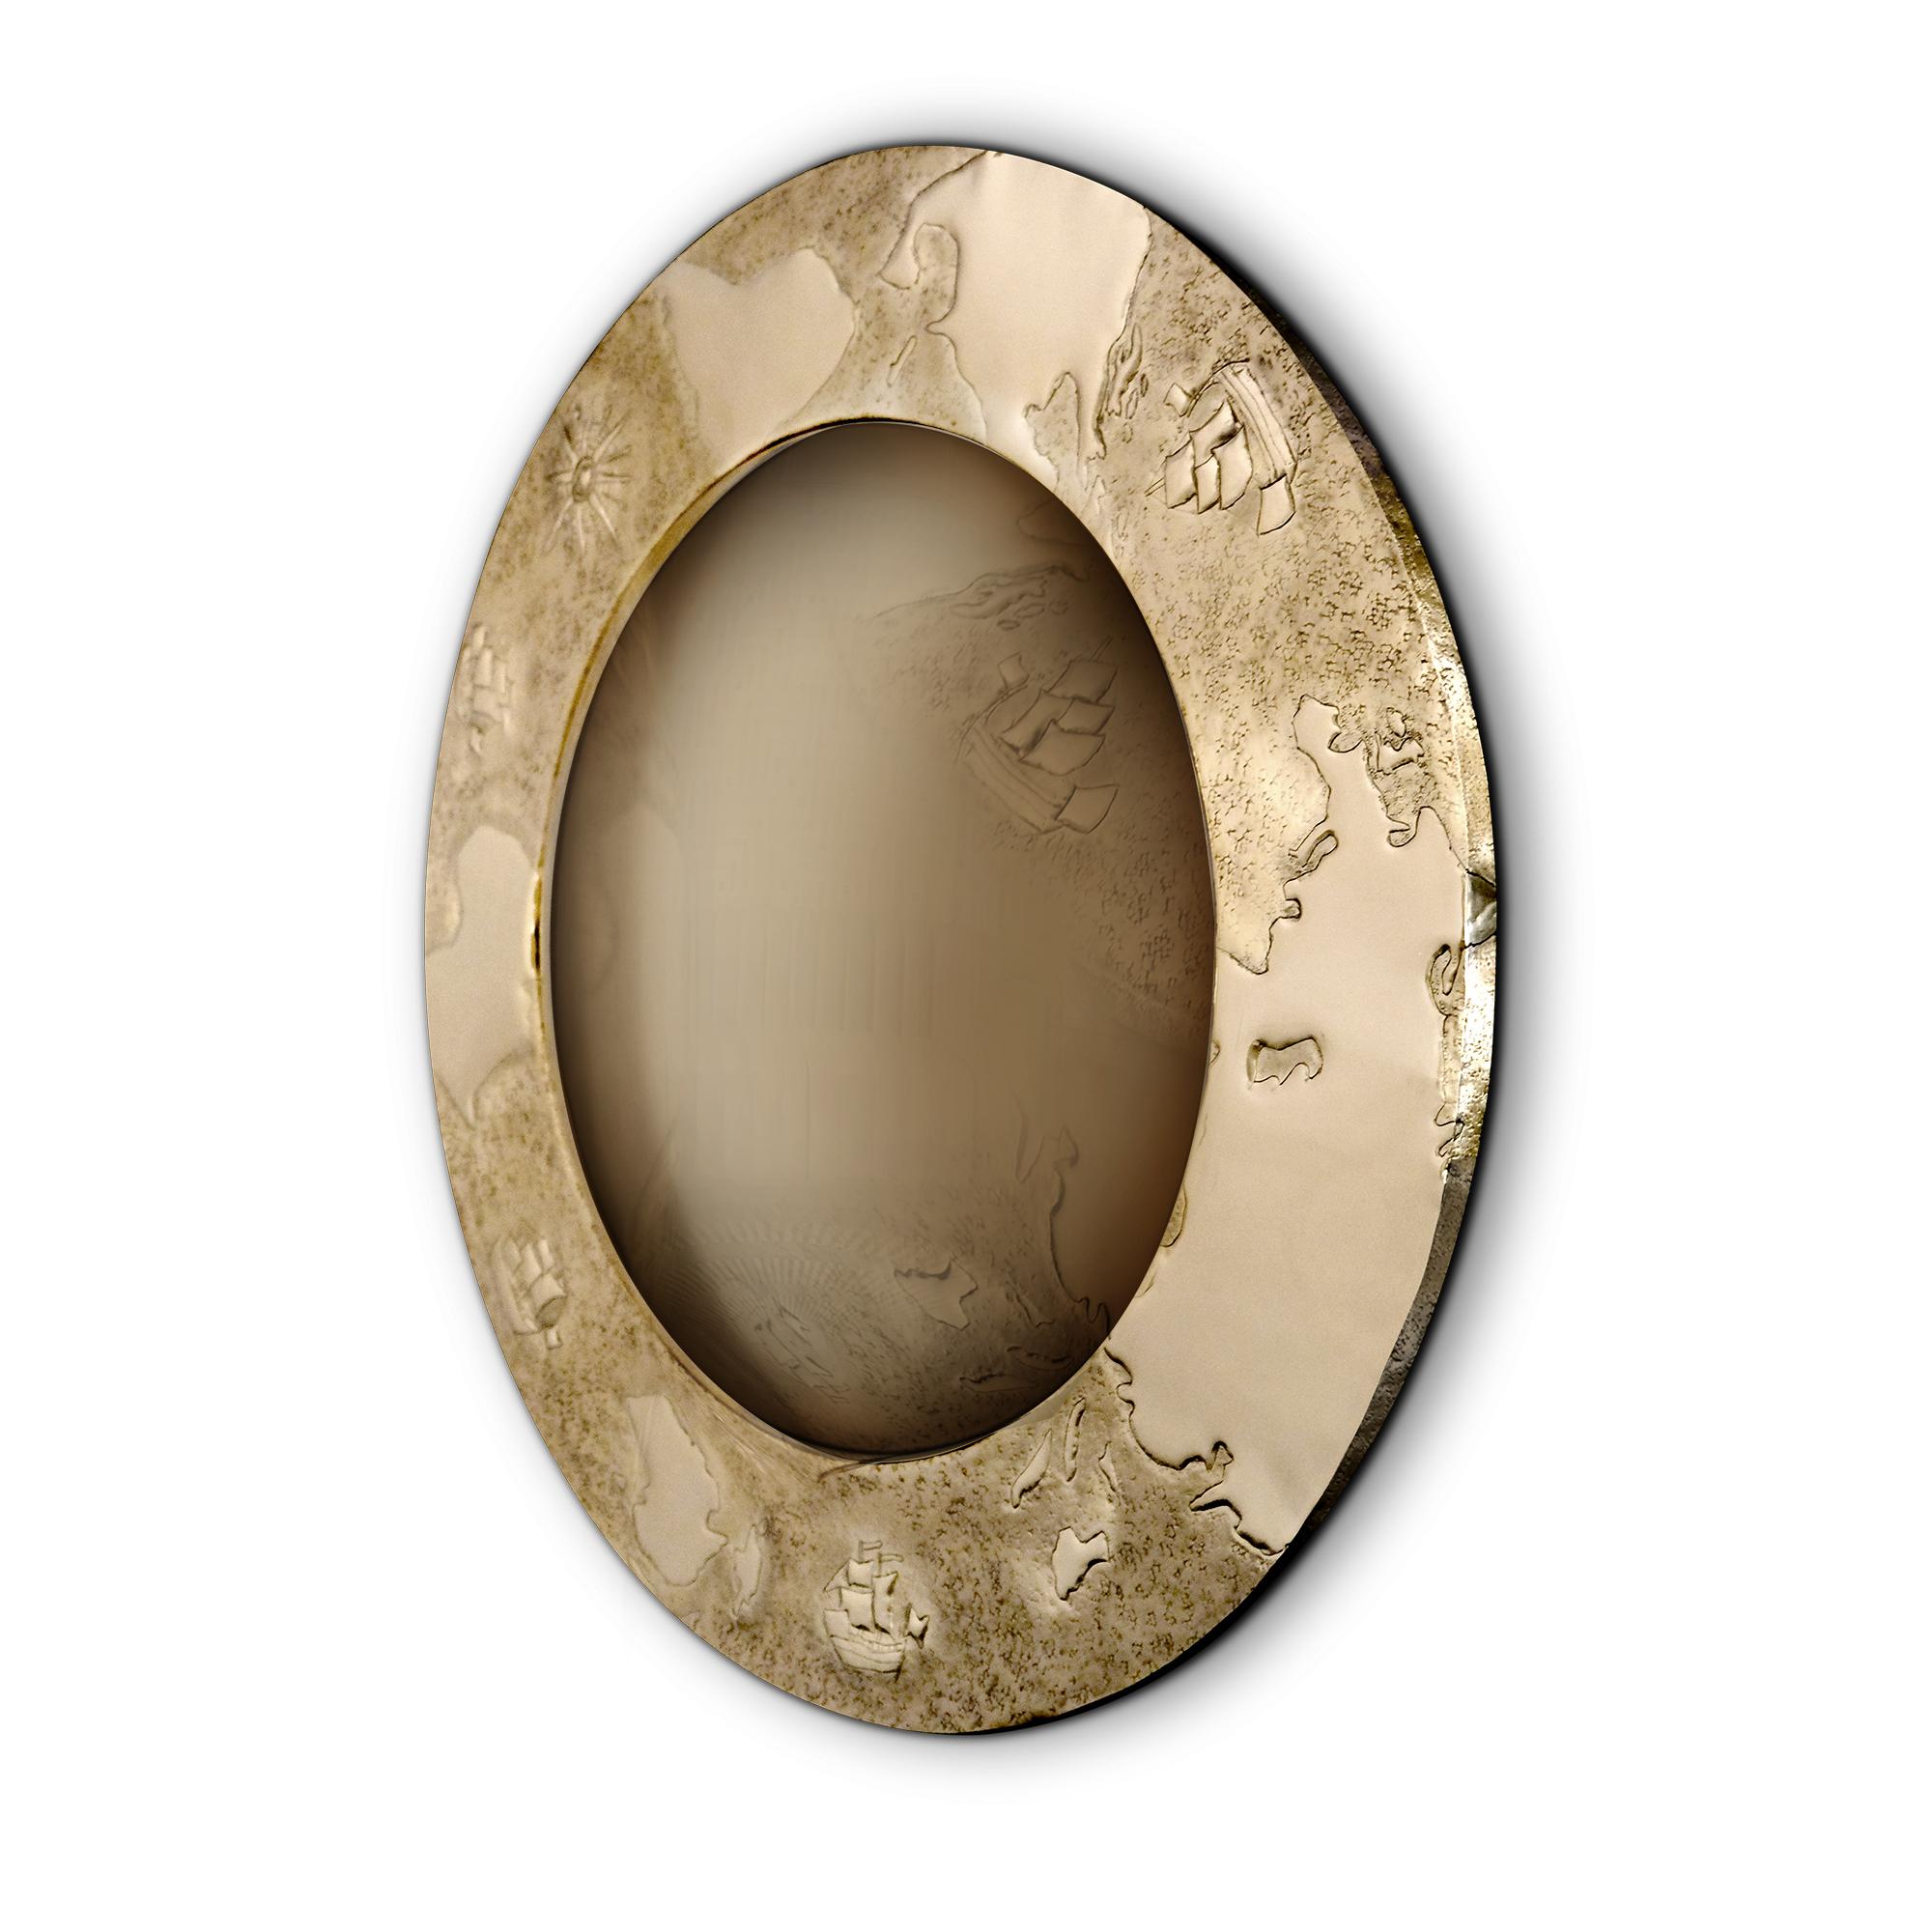 Malabar designers conceived the Horizon Discovery Mirror to honour the discovery times and to pay a tribute to the Portuguese maritime navigators that discovered unknown lands during Portugal's glorious times. Inspired by the divine vision of a new